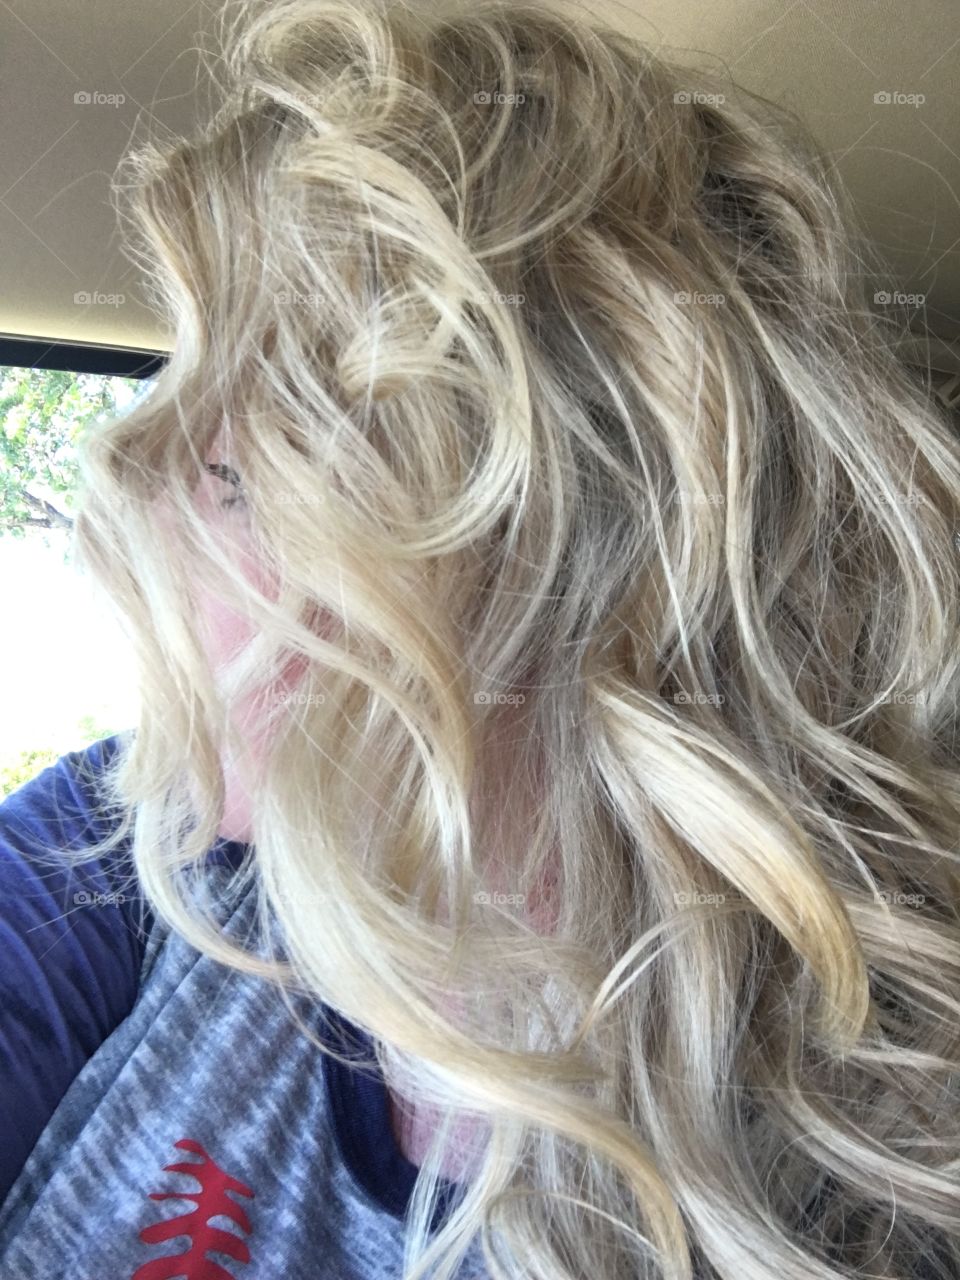 Beachy lose hair curls made with Babyliss Miracurl hair styler.